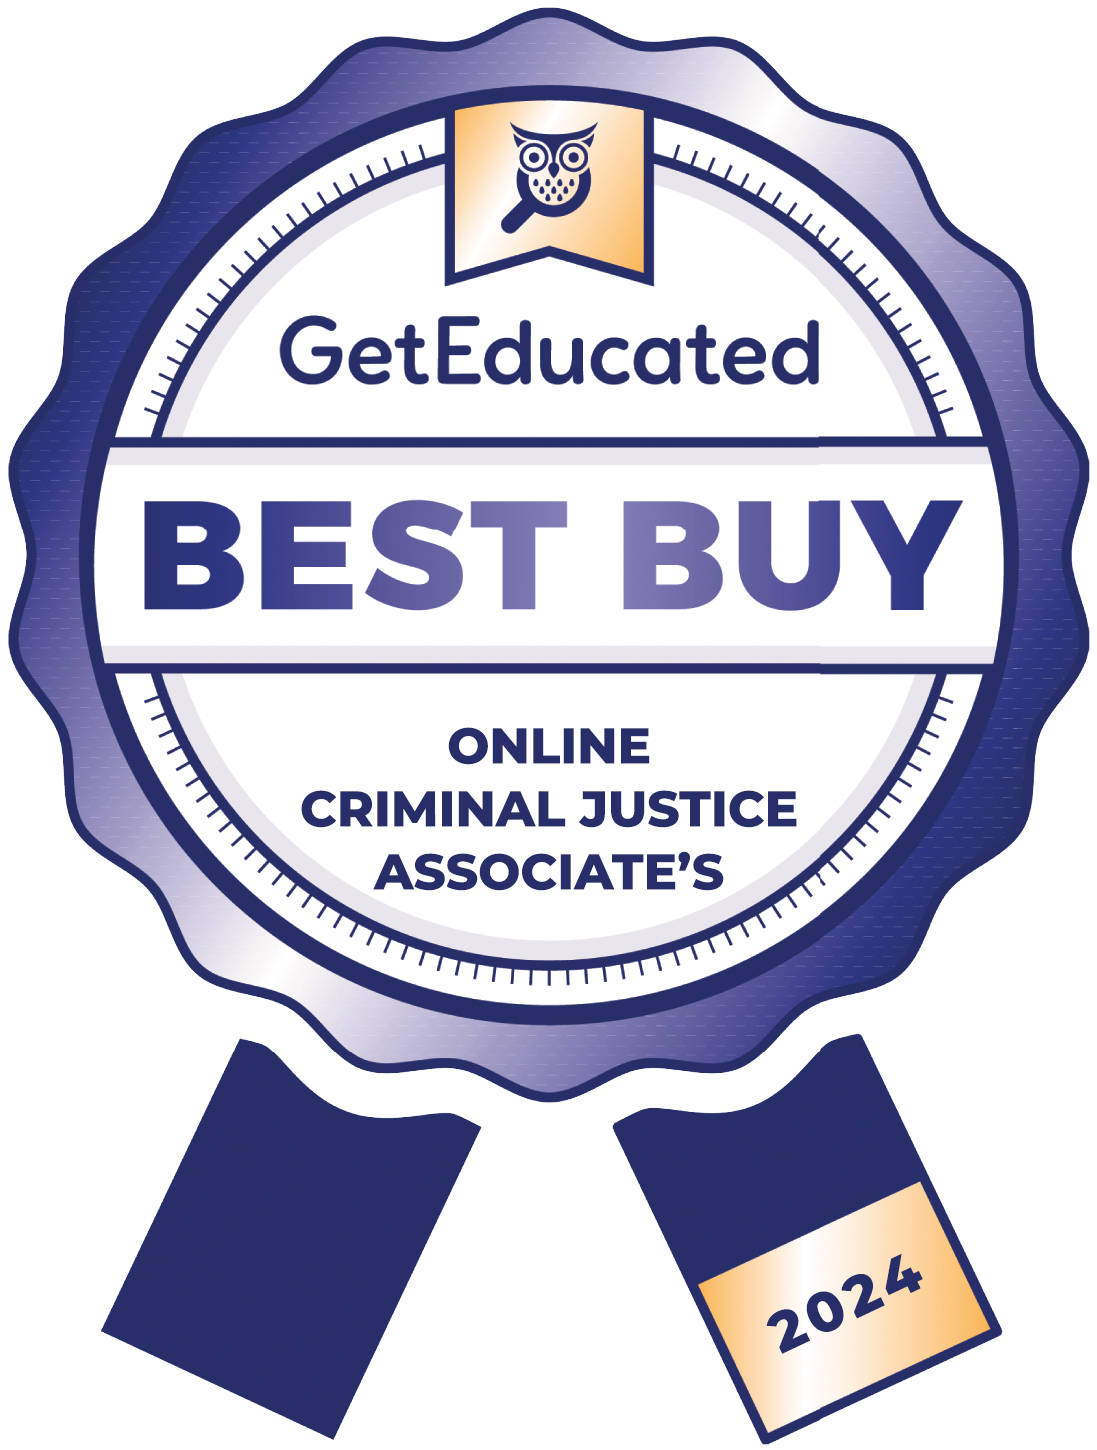 Rankings of the cheapest online criminal justice associate's degree programs